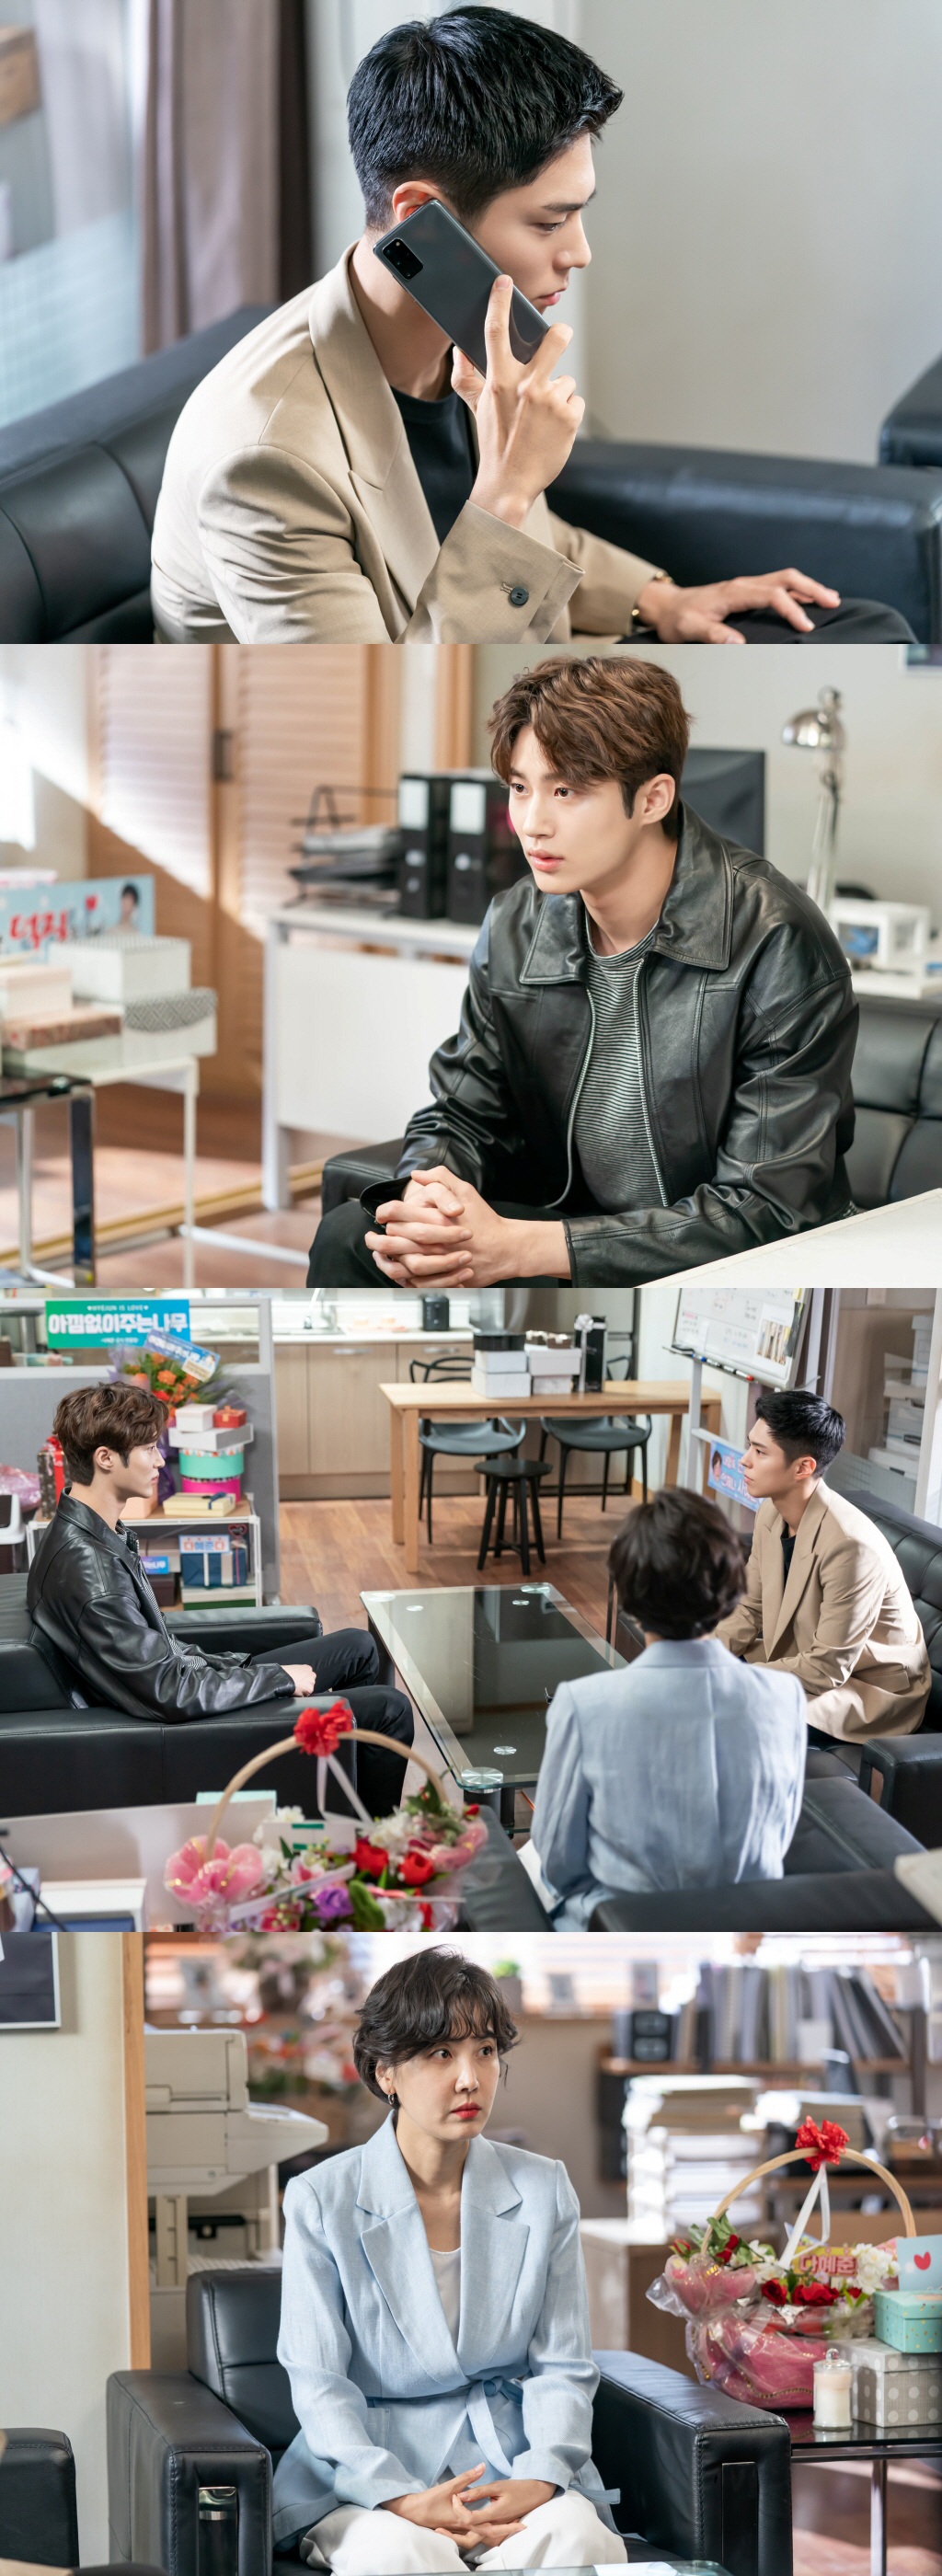 TVN Mon-Tue drama Record of Youth (director Ahn Gil-ho, playwright Ha Myung-hee, production fan entertainment, studio dragon) released the images of Sangers Sa Hye-joon (Park Bo-gum) and Byeon Wooseok on the 12th.The day I have never seen before, I am curious about the nerves.In the last broadcast, Sa Hye-joon won the best performance award by succeeding in the drama Return of the King.Sa Hye-joons unstoppable Shus move, which has achieved Actors dream over the cold reality, has given a thrilling Qatarsis, but unexpected trials have come.The news of Charlie Chung (Lee Seung-jun)s death, which was taken by Sa Hye-joon at the moment of enjoying happiness, amplified his curiosity about future development.In the meantime, the tension of Champon Entertainment is caught, further heightening the sense of Danger.The hard face of Sa Hye-joon, who is talking to someone, makes him guess the unusual incident that came to him.With the silence flowing, the eye-catching of Sa Hye-joon and Won Hae-hyo Day pulls the tension tight. Manager Lee Min-jae (Shin Dong-mi) is also confused.Sa Hye-joon and Won Hae-hyo, who supported each other more than anyone else while growing the same dream, are drawing attention to what changes will come to the two youths who face the crossroads of different Choices.In the 11th episode, which is broadcast today (12th), Sa Hye-joons overcoming period, which faces an unexpected ordeal, is drawn.Charlie Justice A helper who is not welcomed by Sa Hye-joon, who is suffering from rumors that he can not control by death, will appear.Record of Youth production team said, Please pay attention to whether you can protect your dreams, love and friendship in your own Danger.Choices of Sa Hye-joon, who does not lose his conviction, will have another impression and Qatarsis. Meanwhile, the 11th episode of tvN Mon-Tue drama Record of Youth will air today (12th) at 9 p.m.